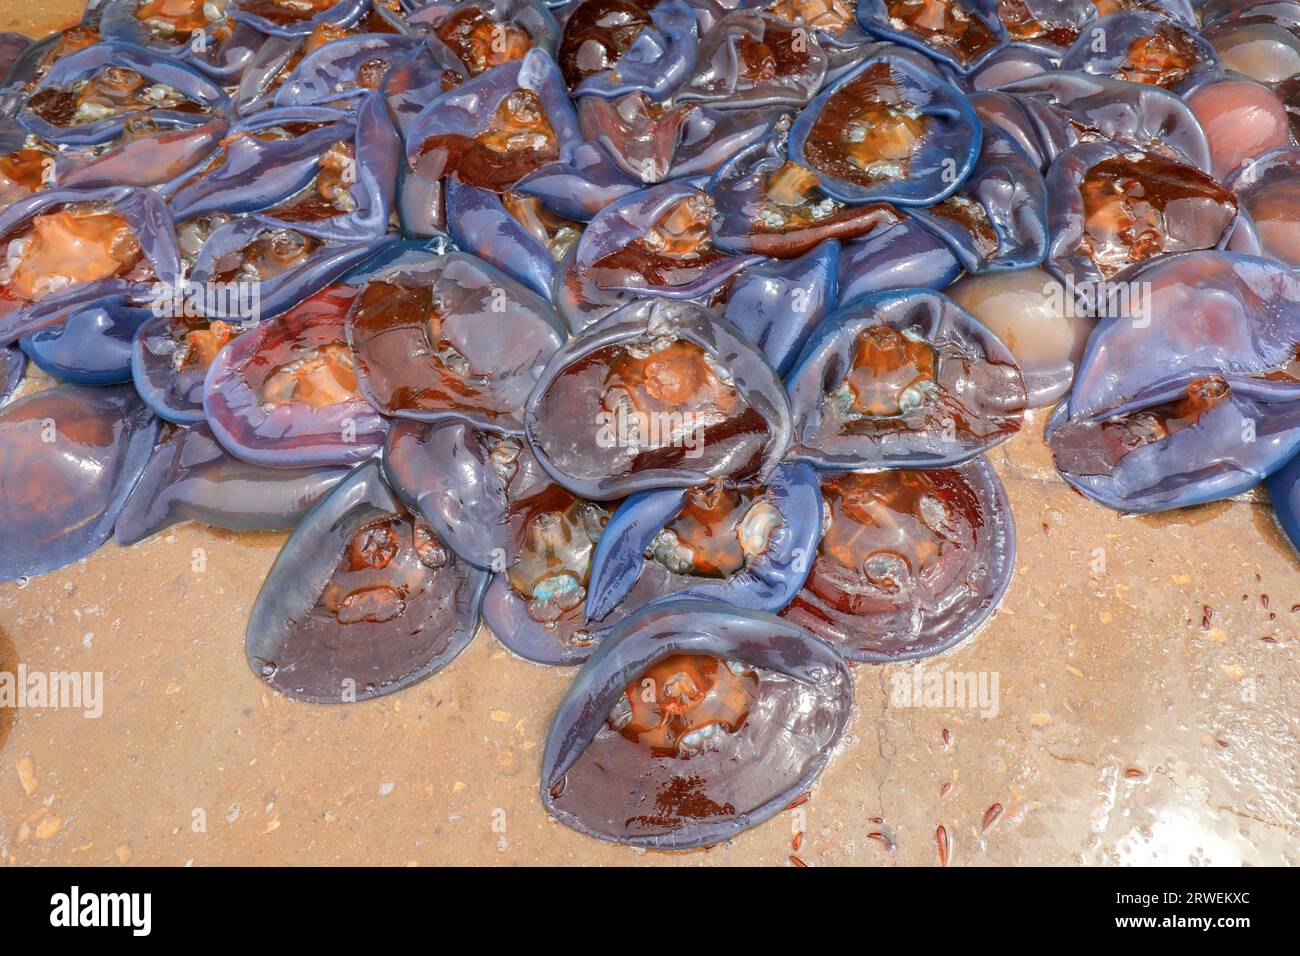 Jellyfish skin piled up on the cement floor in a seafood processing plant, North China Stock Photo